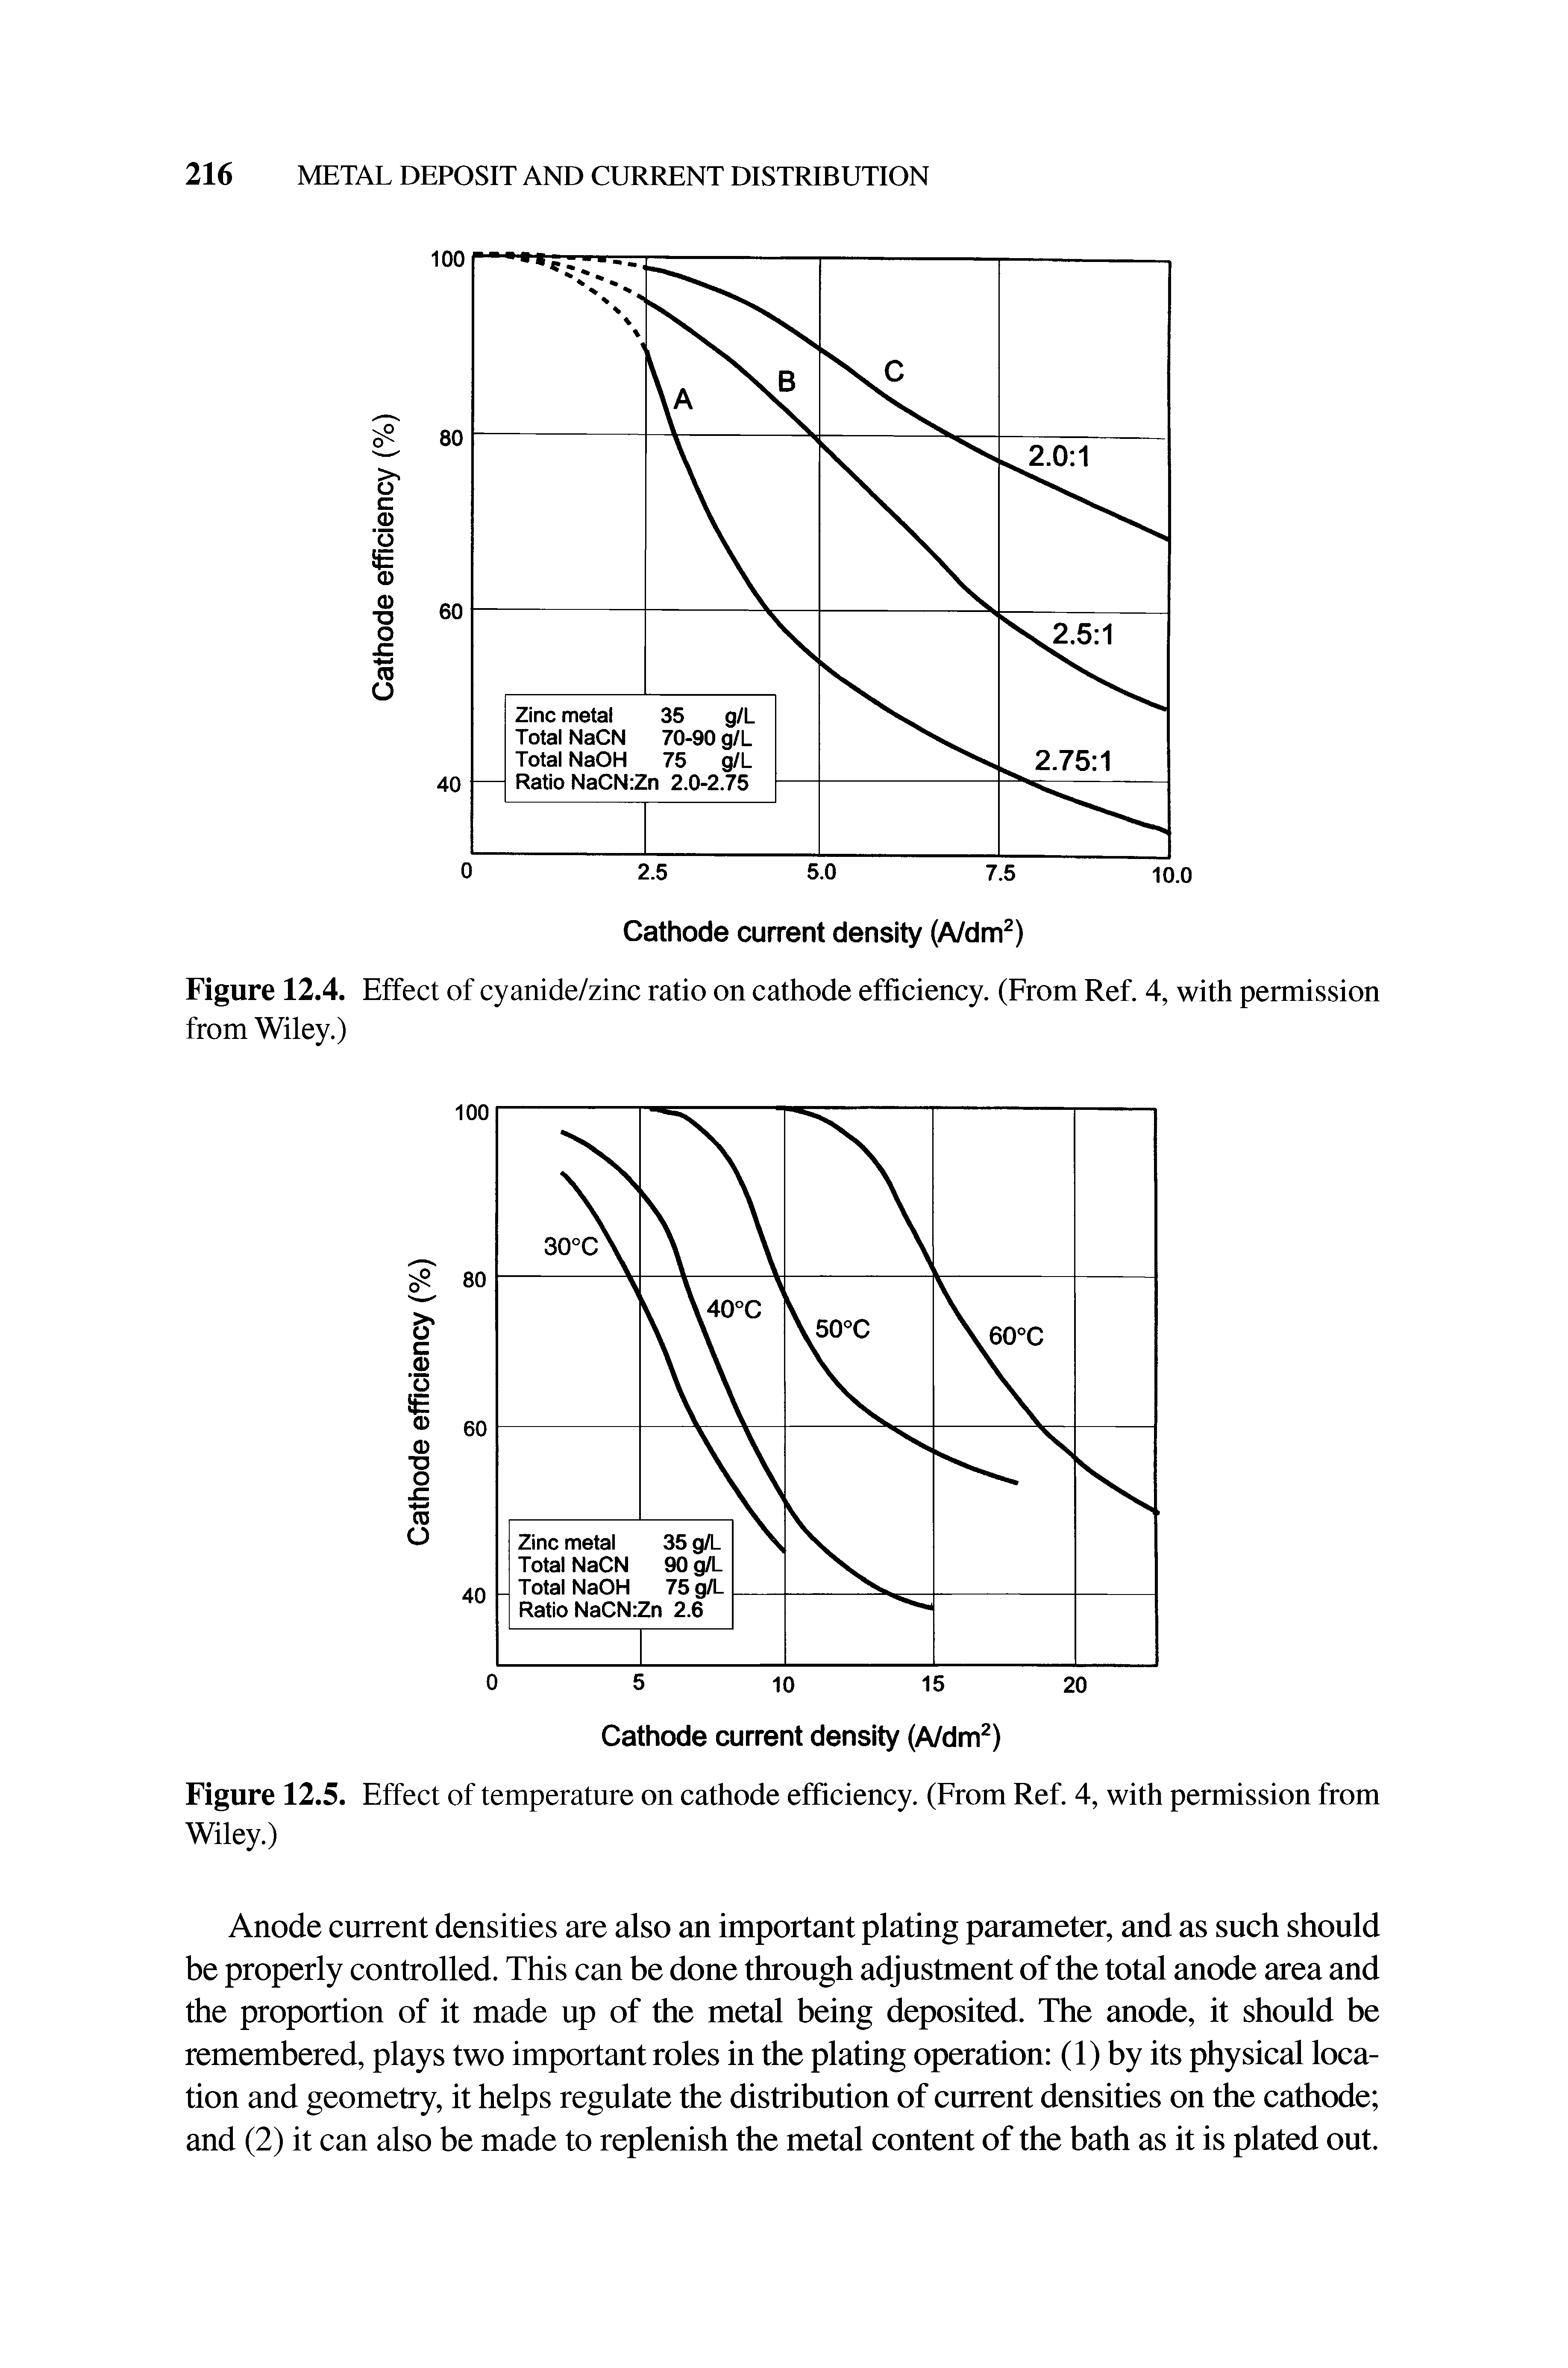 Figure 12.5. Effect of temperature on cathode efficiency. (From Ref. 4, with permission from Wiley.)...